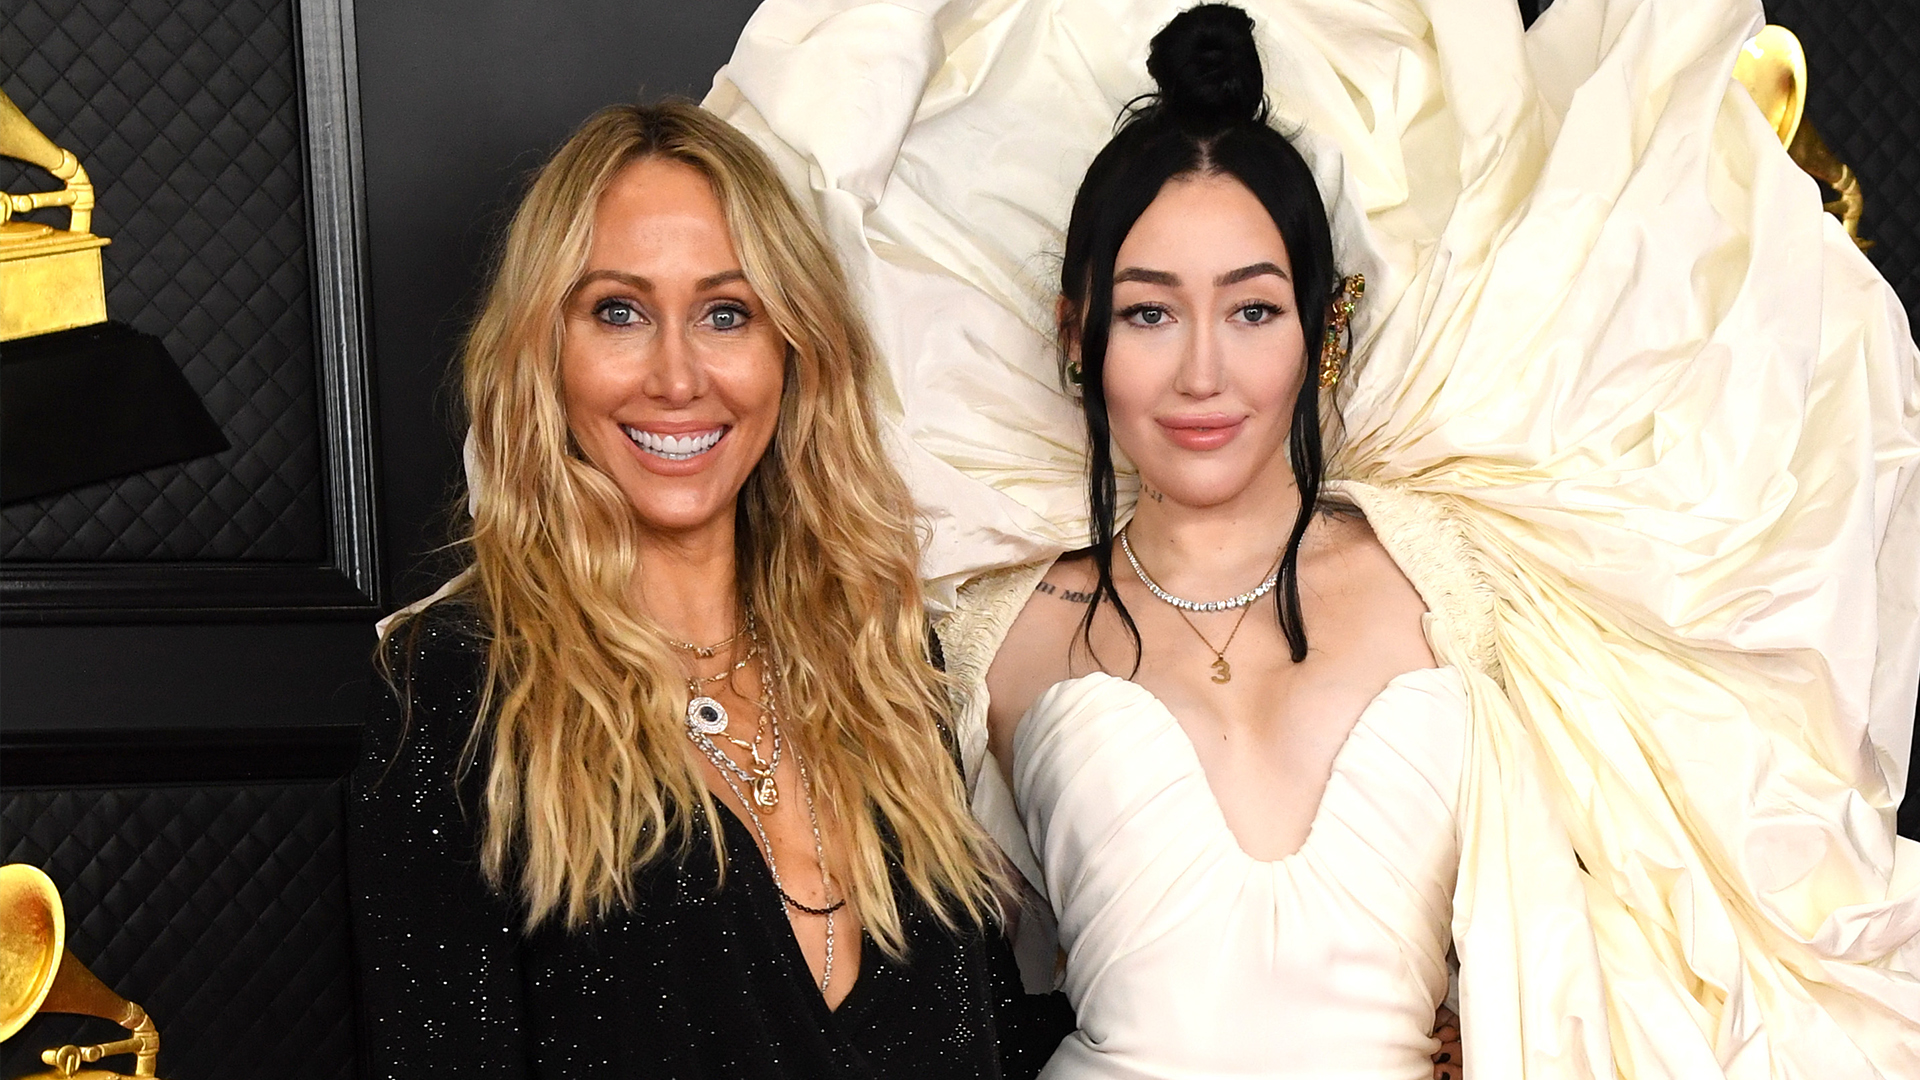 Tish Cyrus in turmoil: No communication with daughter after scandal involving stolen boyfriend